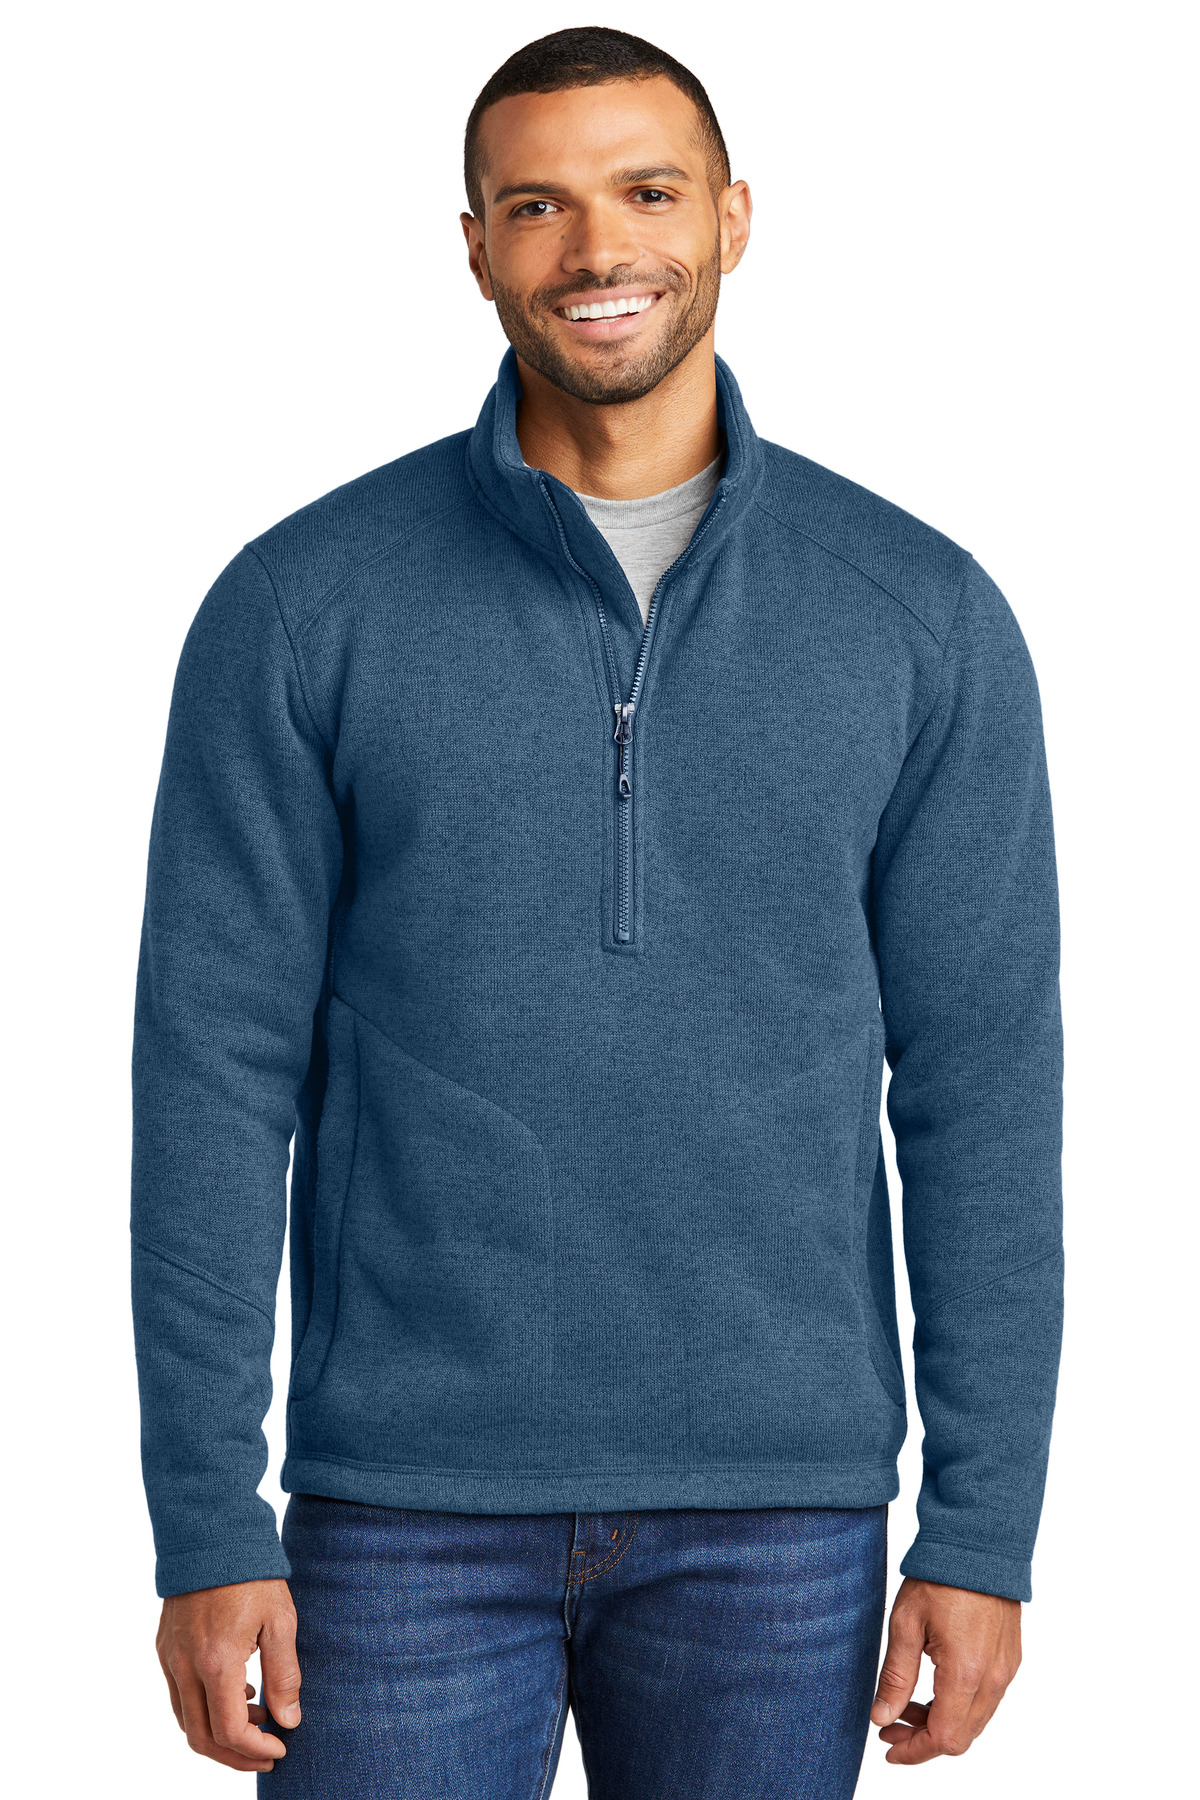 click to view Insignia Blue Heather